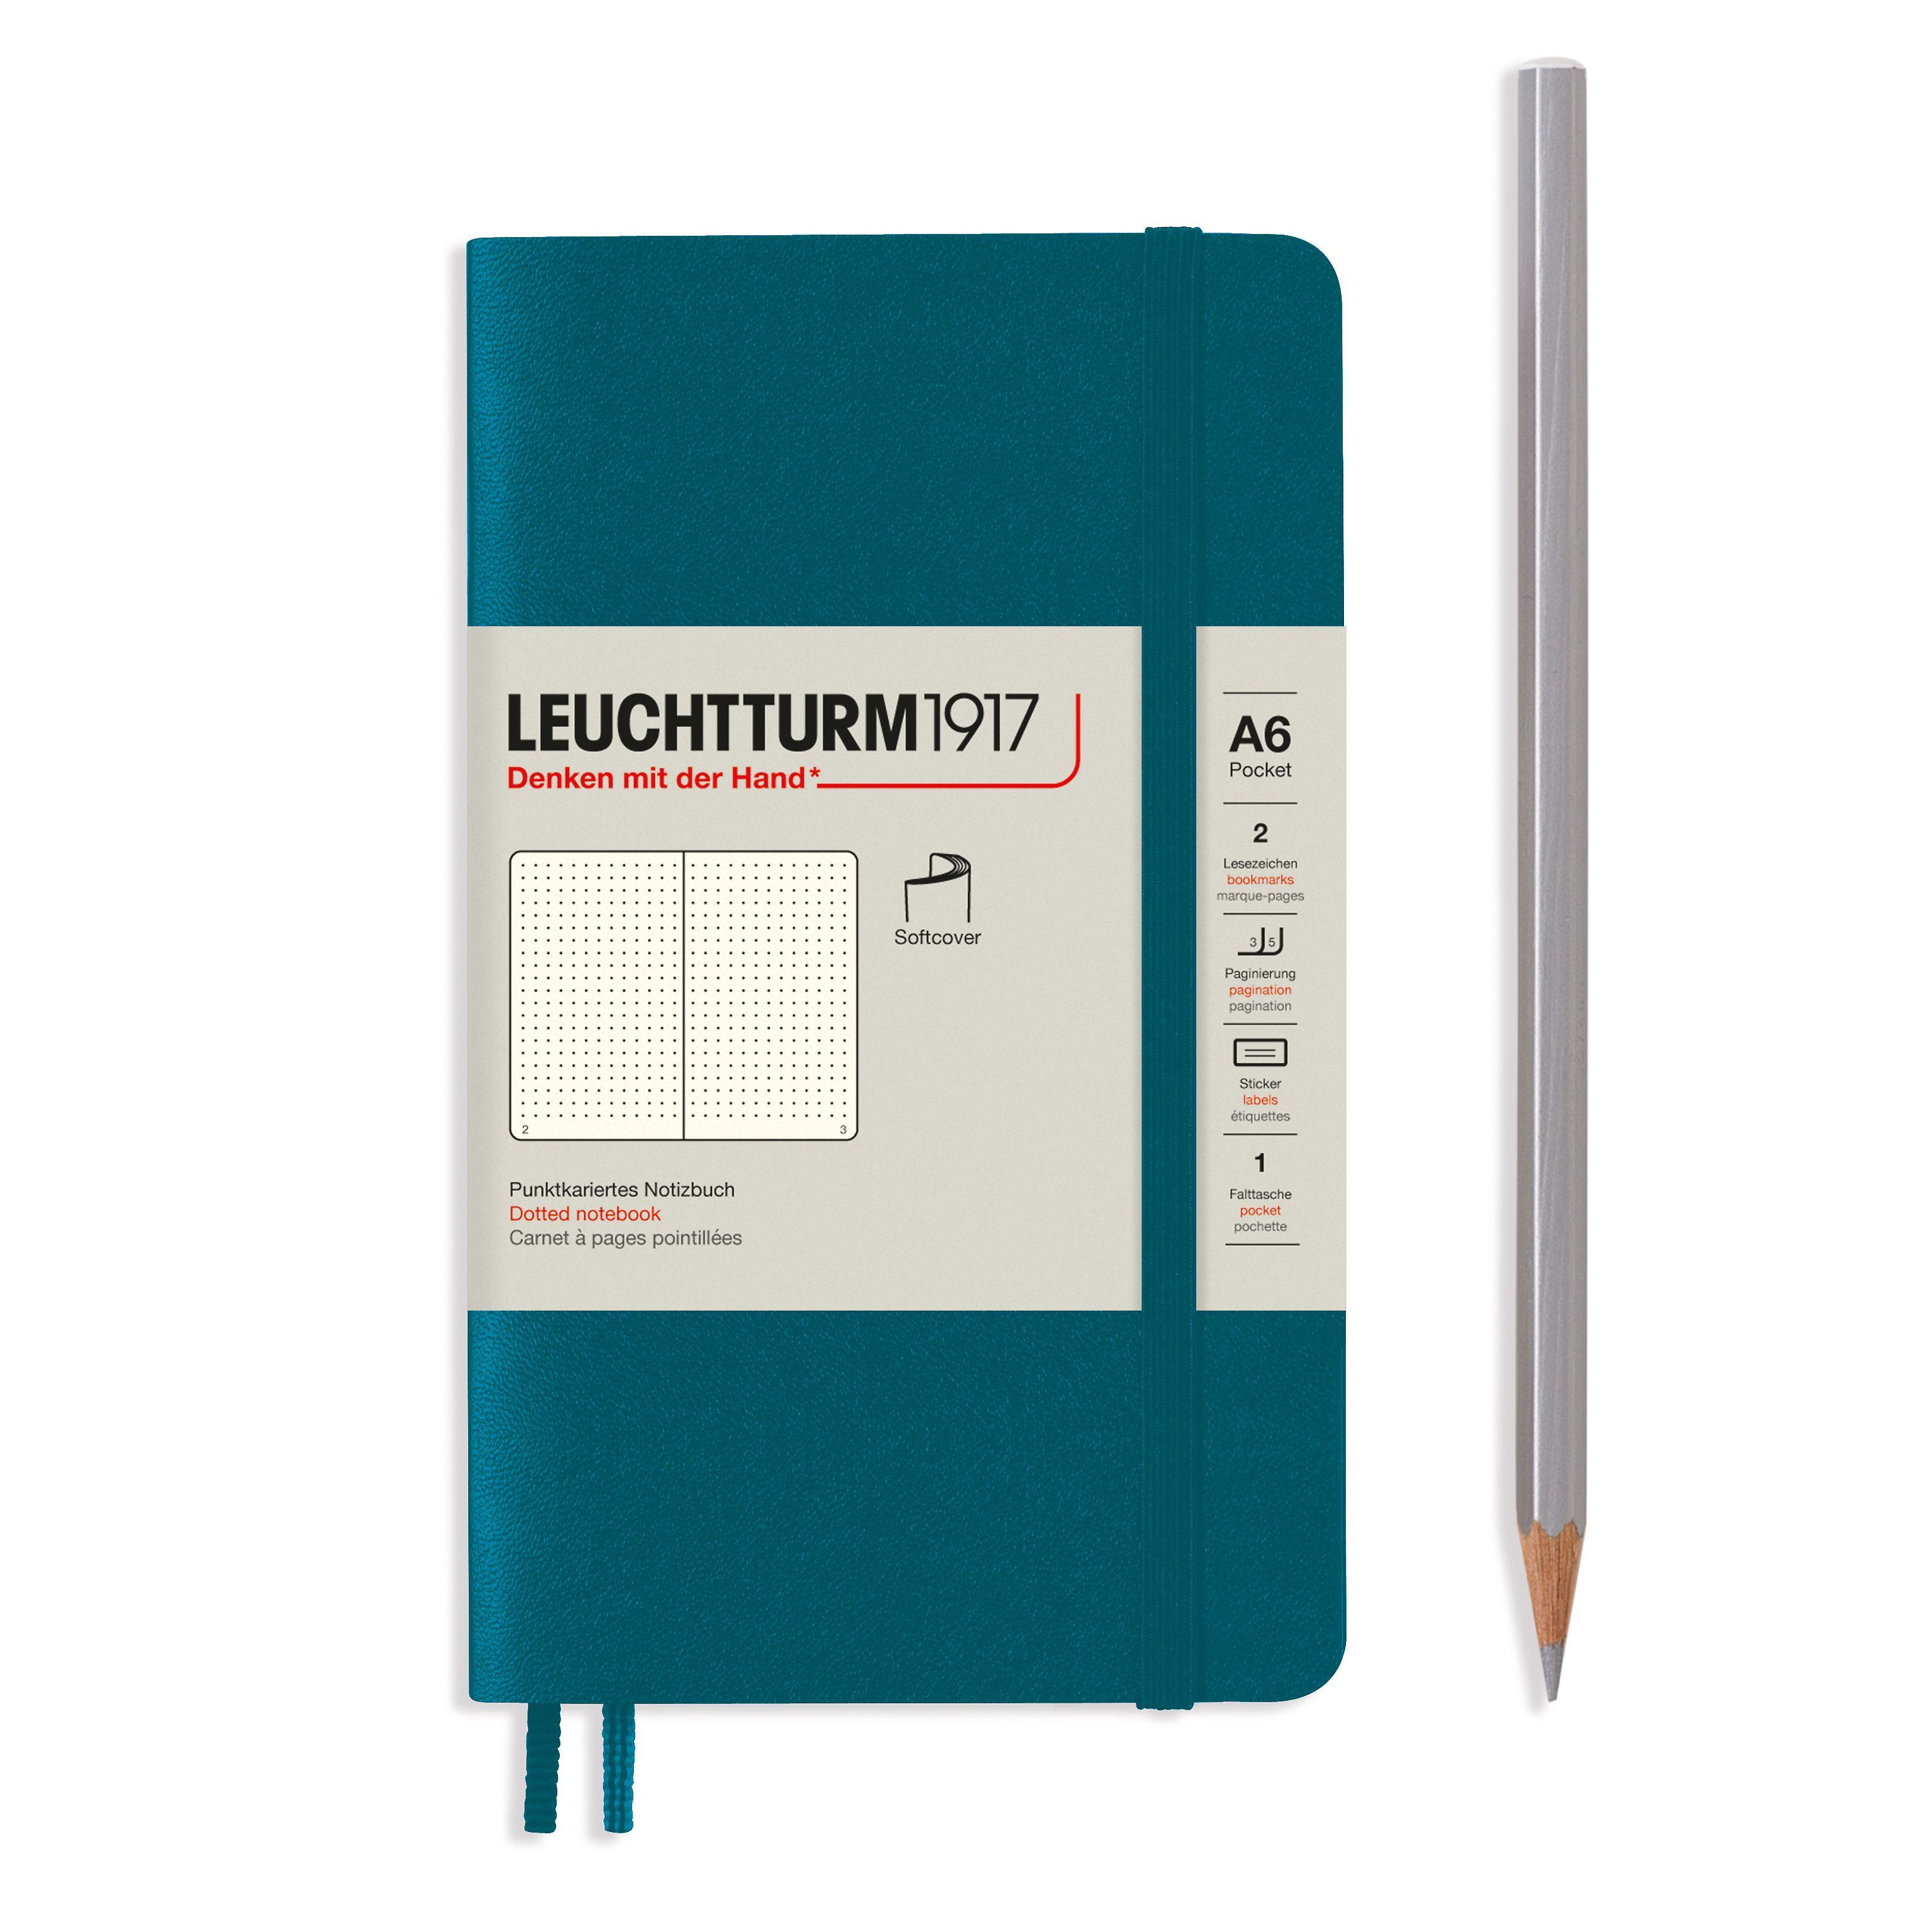 Toestemming mug begroting Leuchtturm Notitieboek softcover A6 Pacific Dotted. | Alternote.nl 